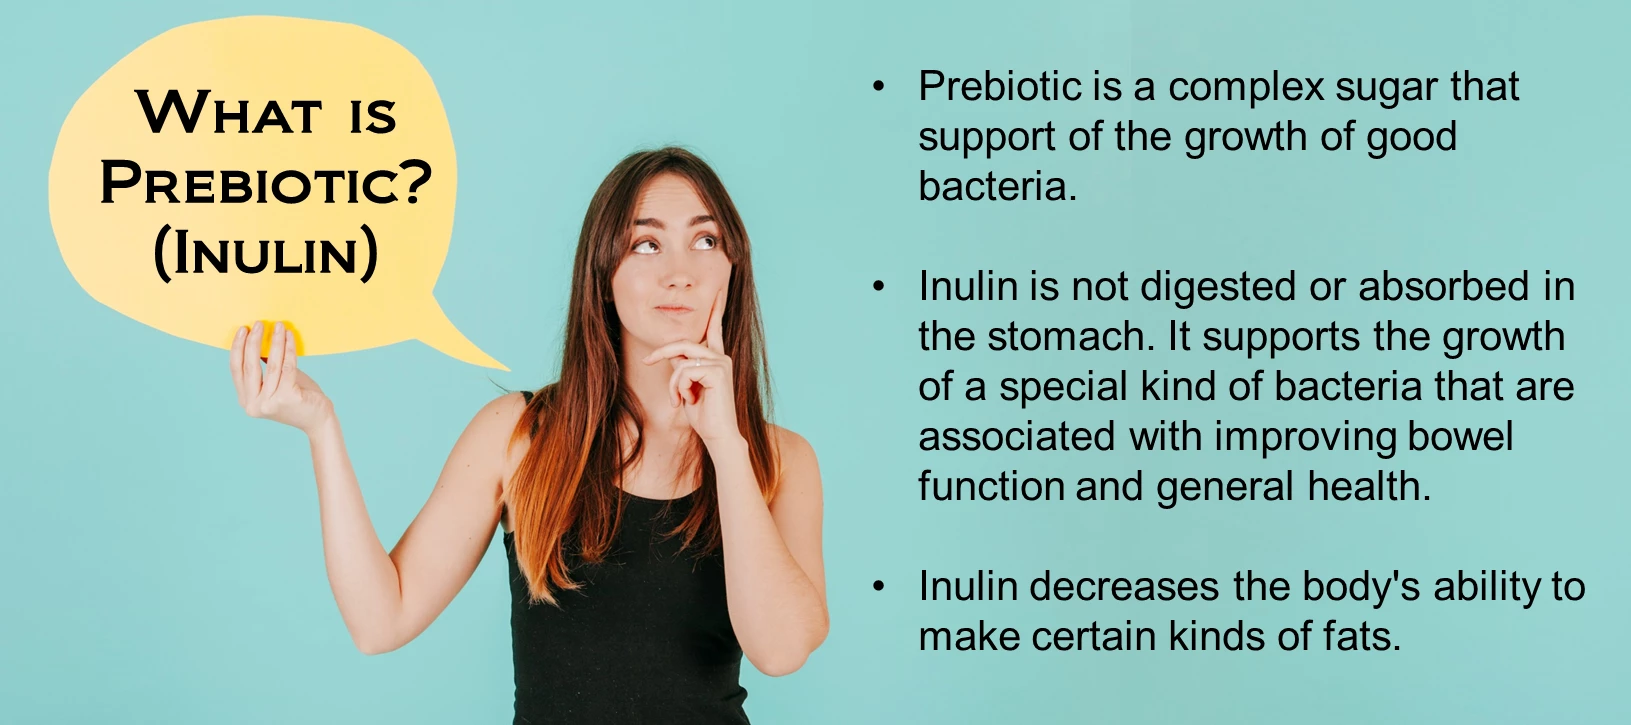 1631-what-is-prebiotic2.png